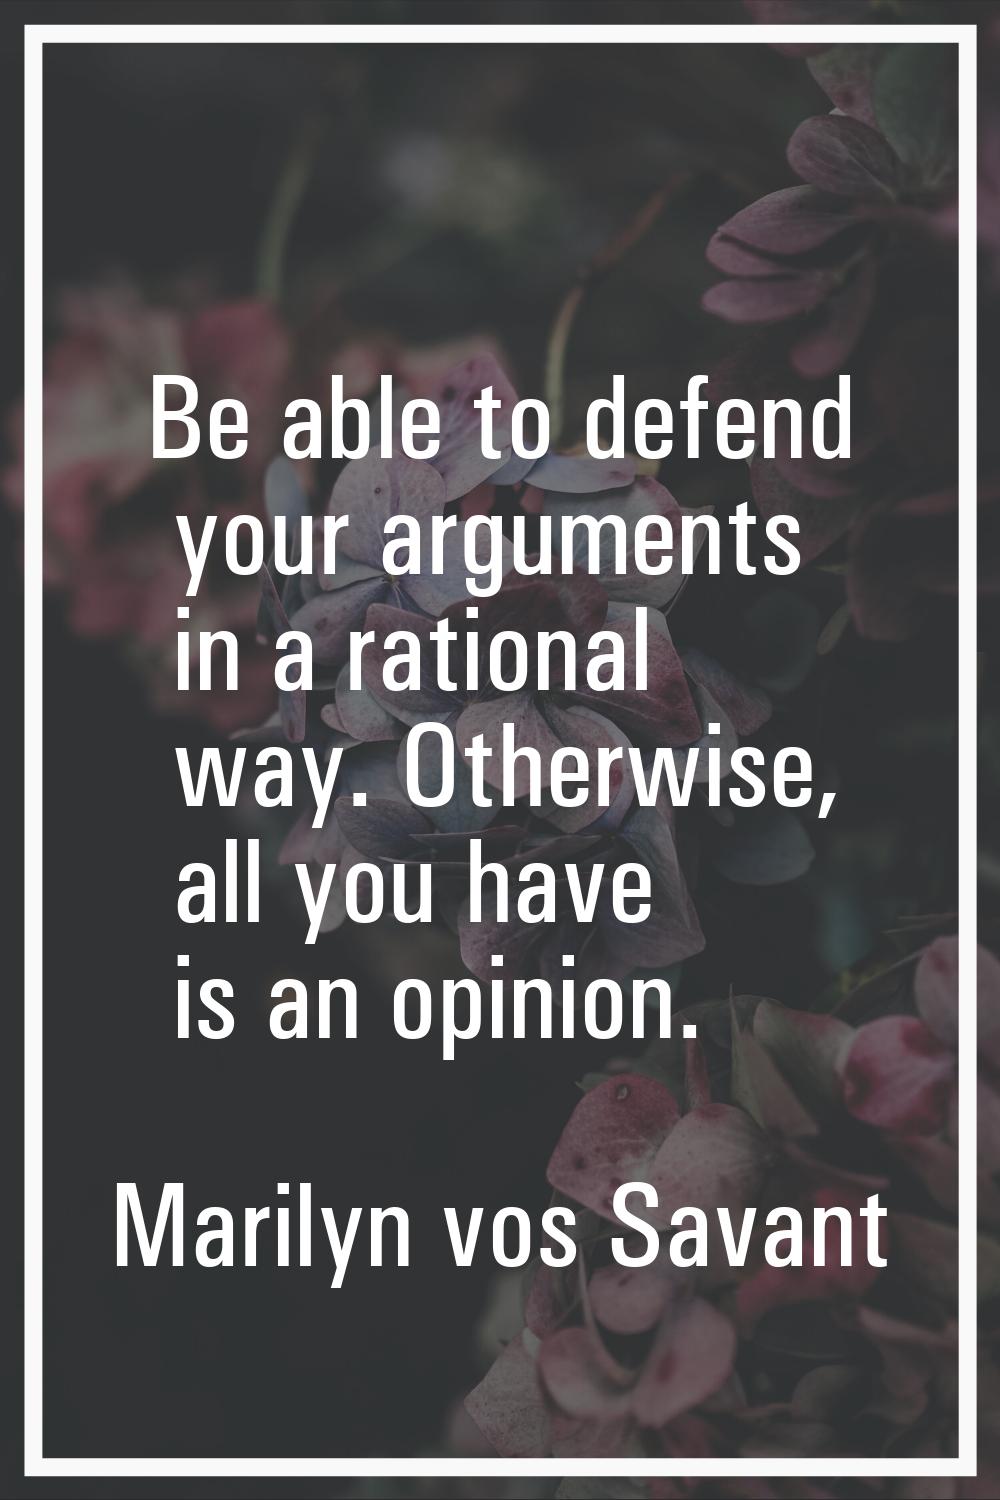 Be able to defend your arguments in a rational way. Otherwise, all you have is an opinion.